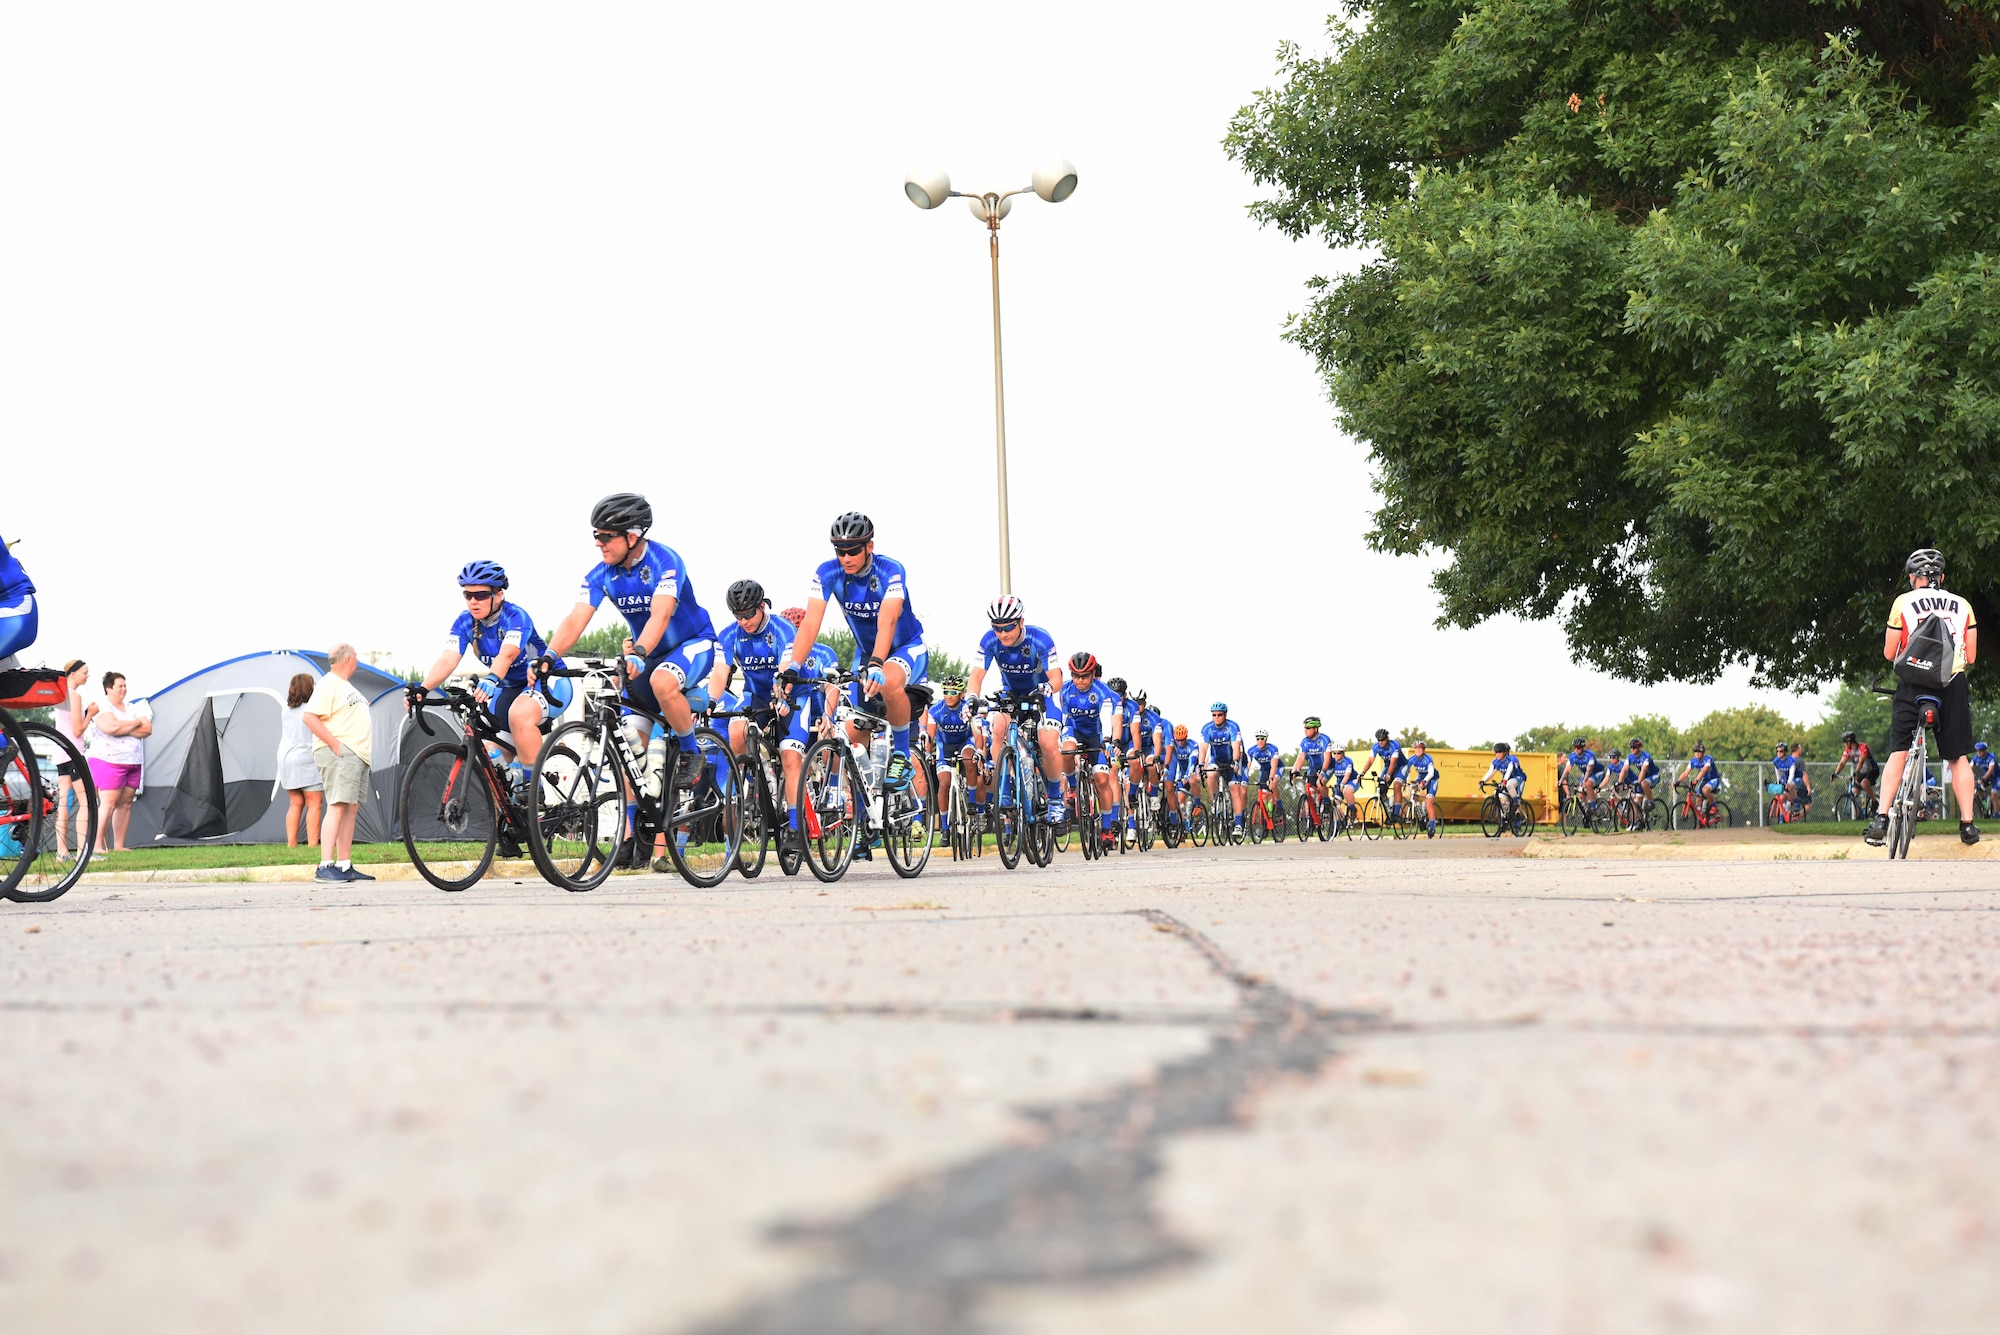 Air Force Cycling Team members depart from Onawa, Iowa, July 22, 2018. Team Dakota and the Air Force Cycling Team participated in the Register’s Annual Great Bicycle Ride Across Iowa, where they rode roughly 460 miles, helped fix other participants’ bikes, and supported Air Forces recruiting efforts. (U.S. Air Force photo by Airman 1st Class Thomas Karol)